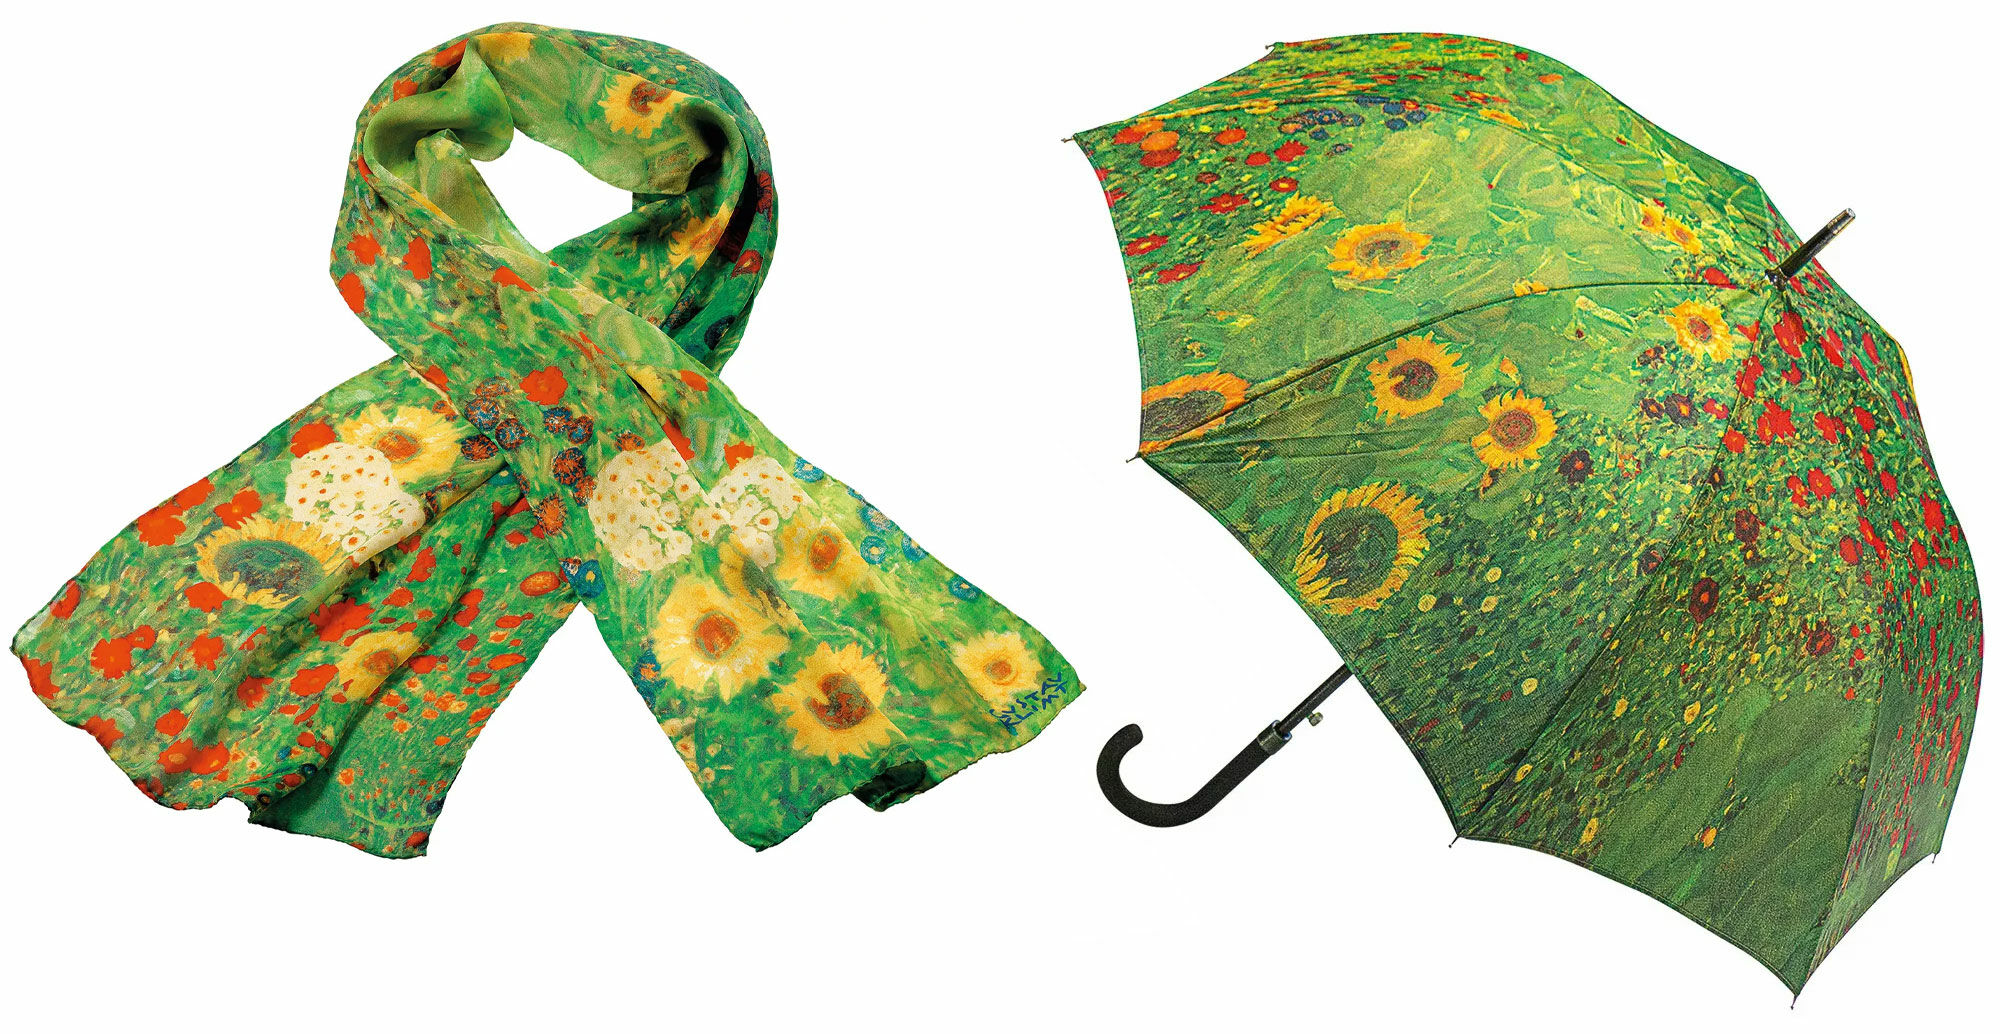 Silk scarf and stick umbrella "Peasant Garden with Sunflowers" (1907) as a set by Gustav Klimt